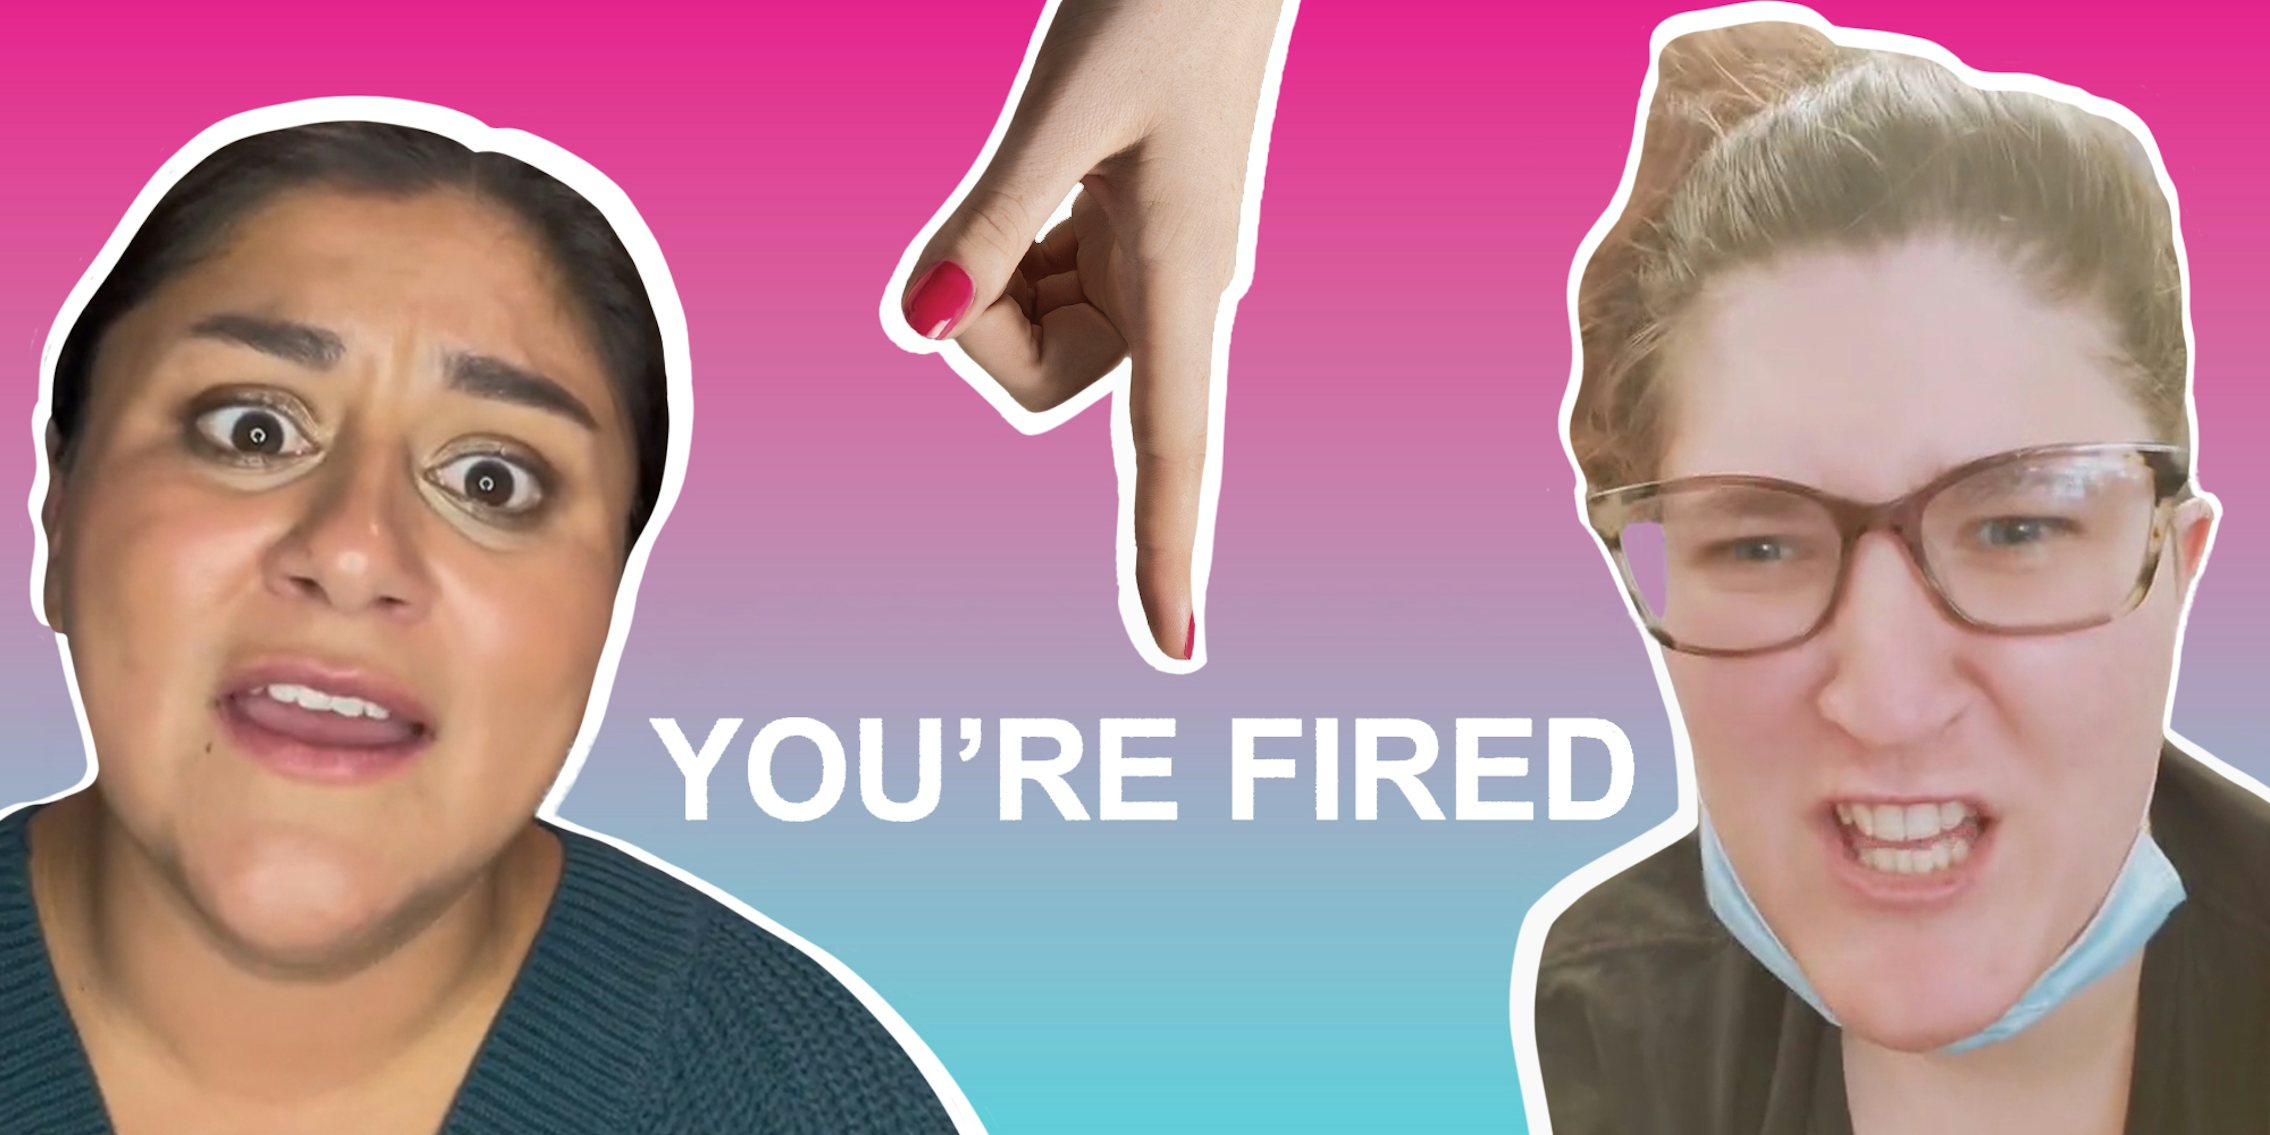 TikTok creators in front of pink to blue gradient background with hand pointing to centered caption 'YOU'RE FIRED'